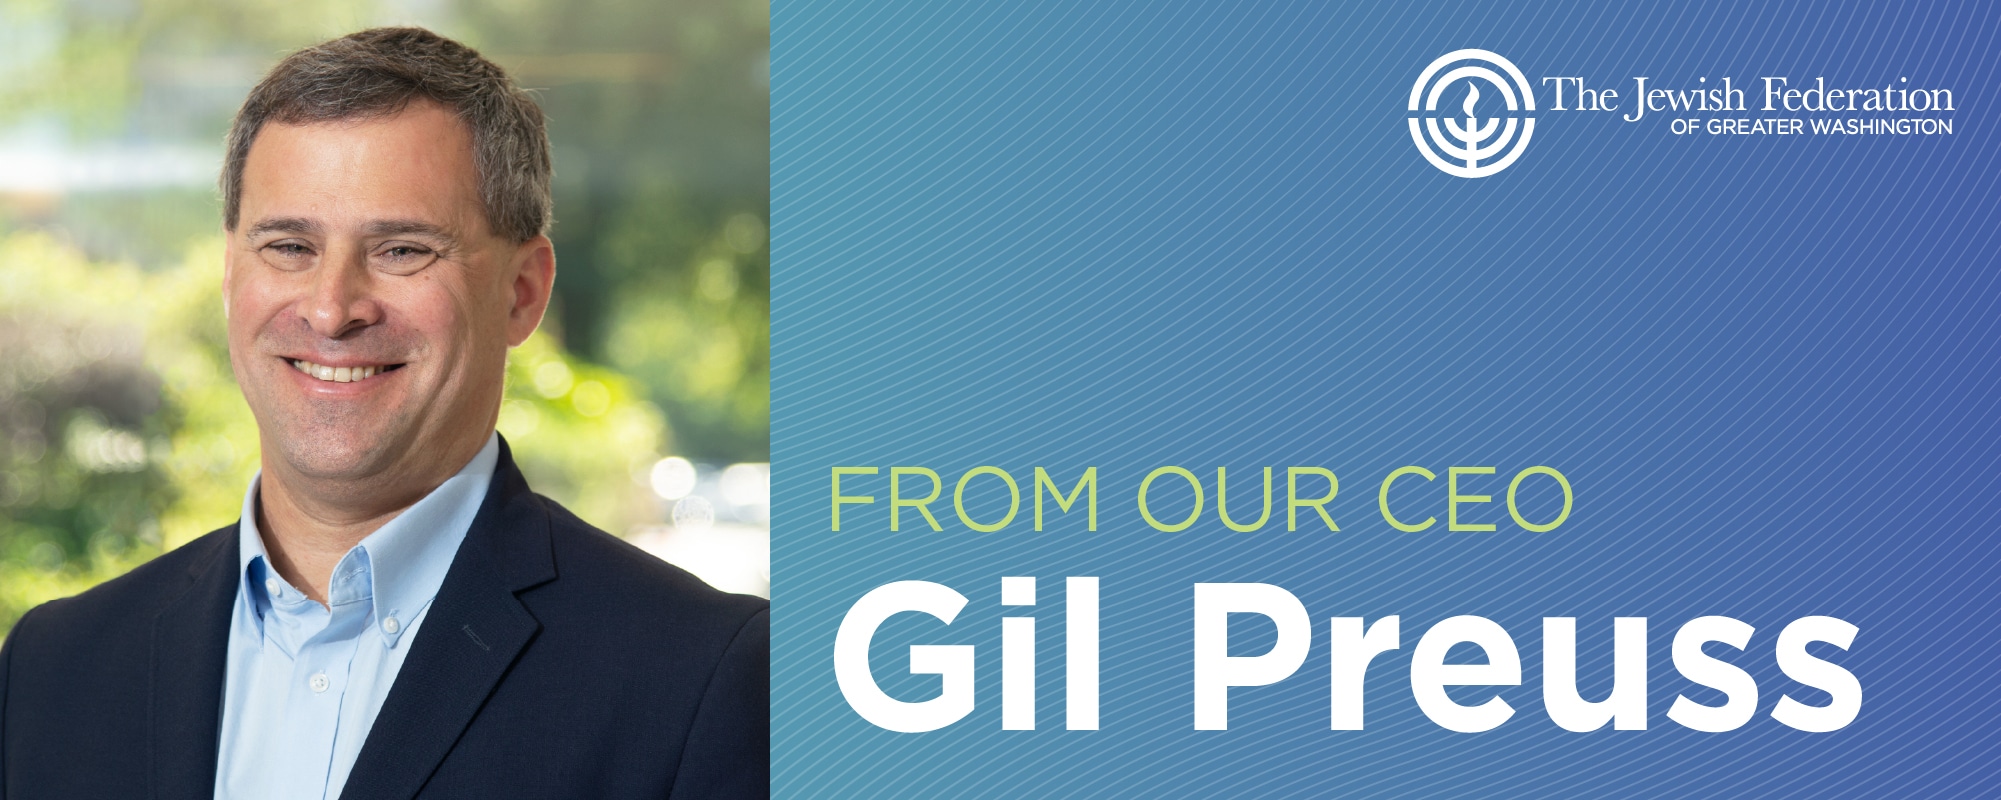 A Message from Our CEO, Gil Preuss: May 8, 2020